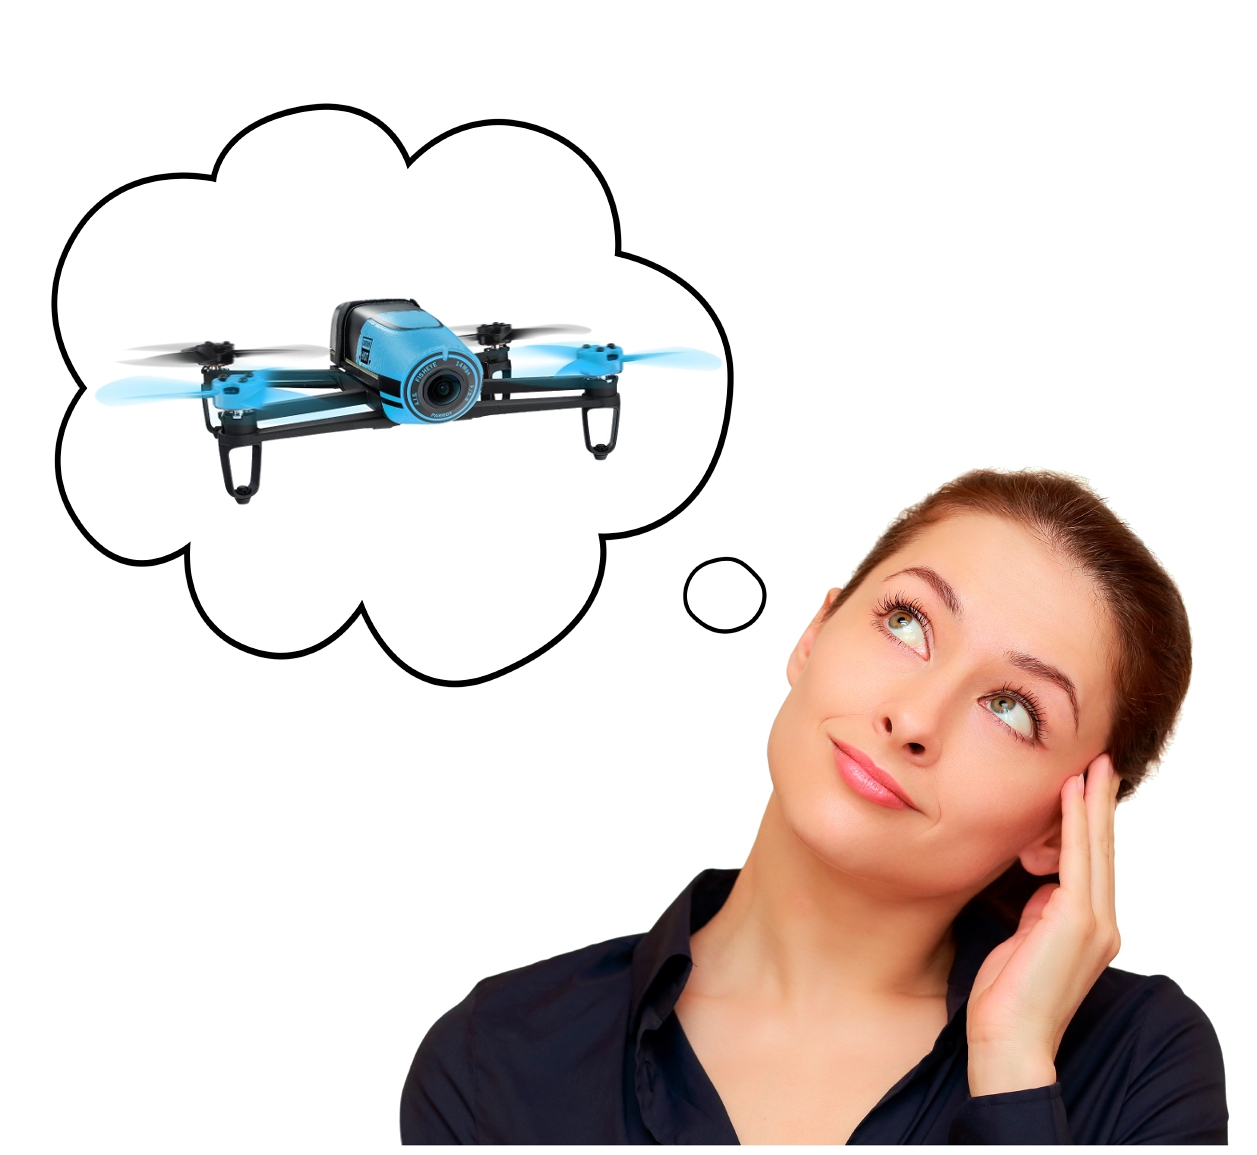 Reasons Why You Should Read Quadcopter Reviews Before Buying One